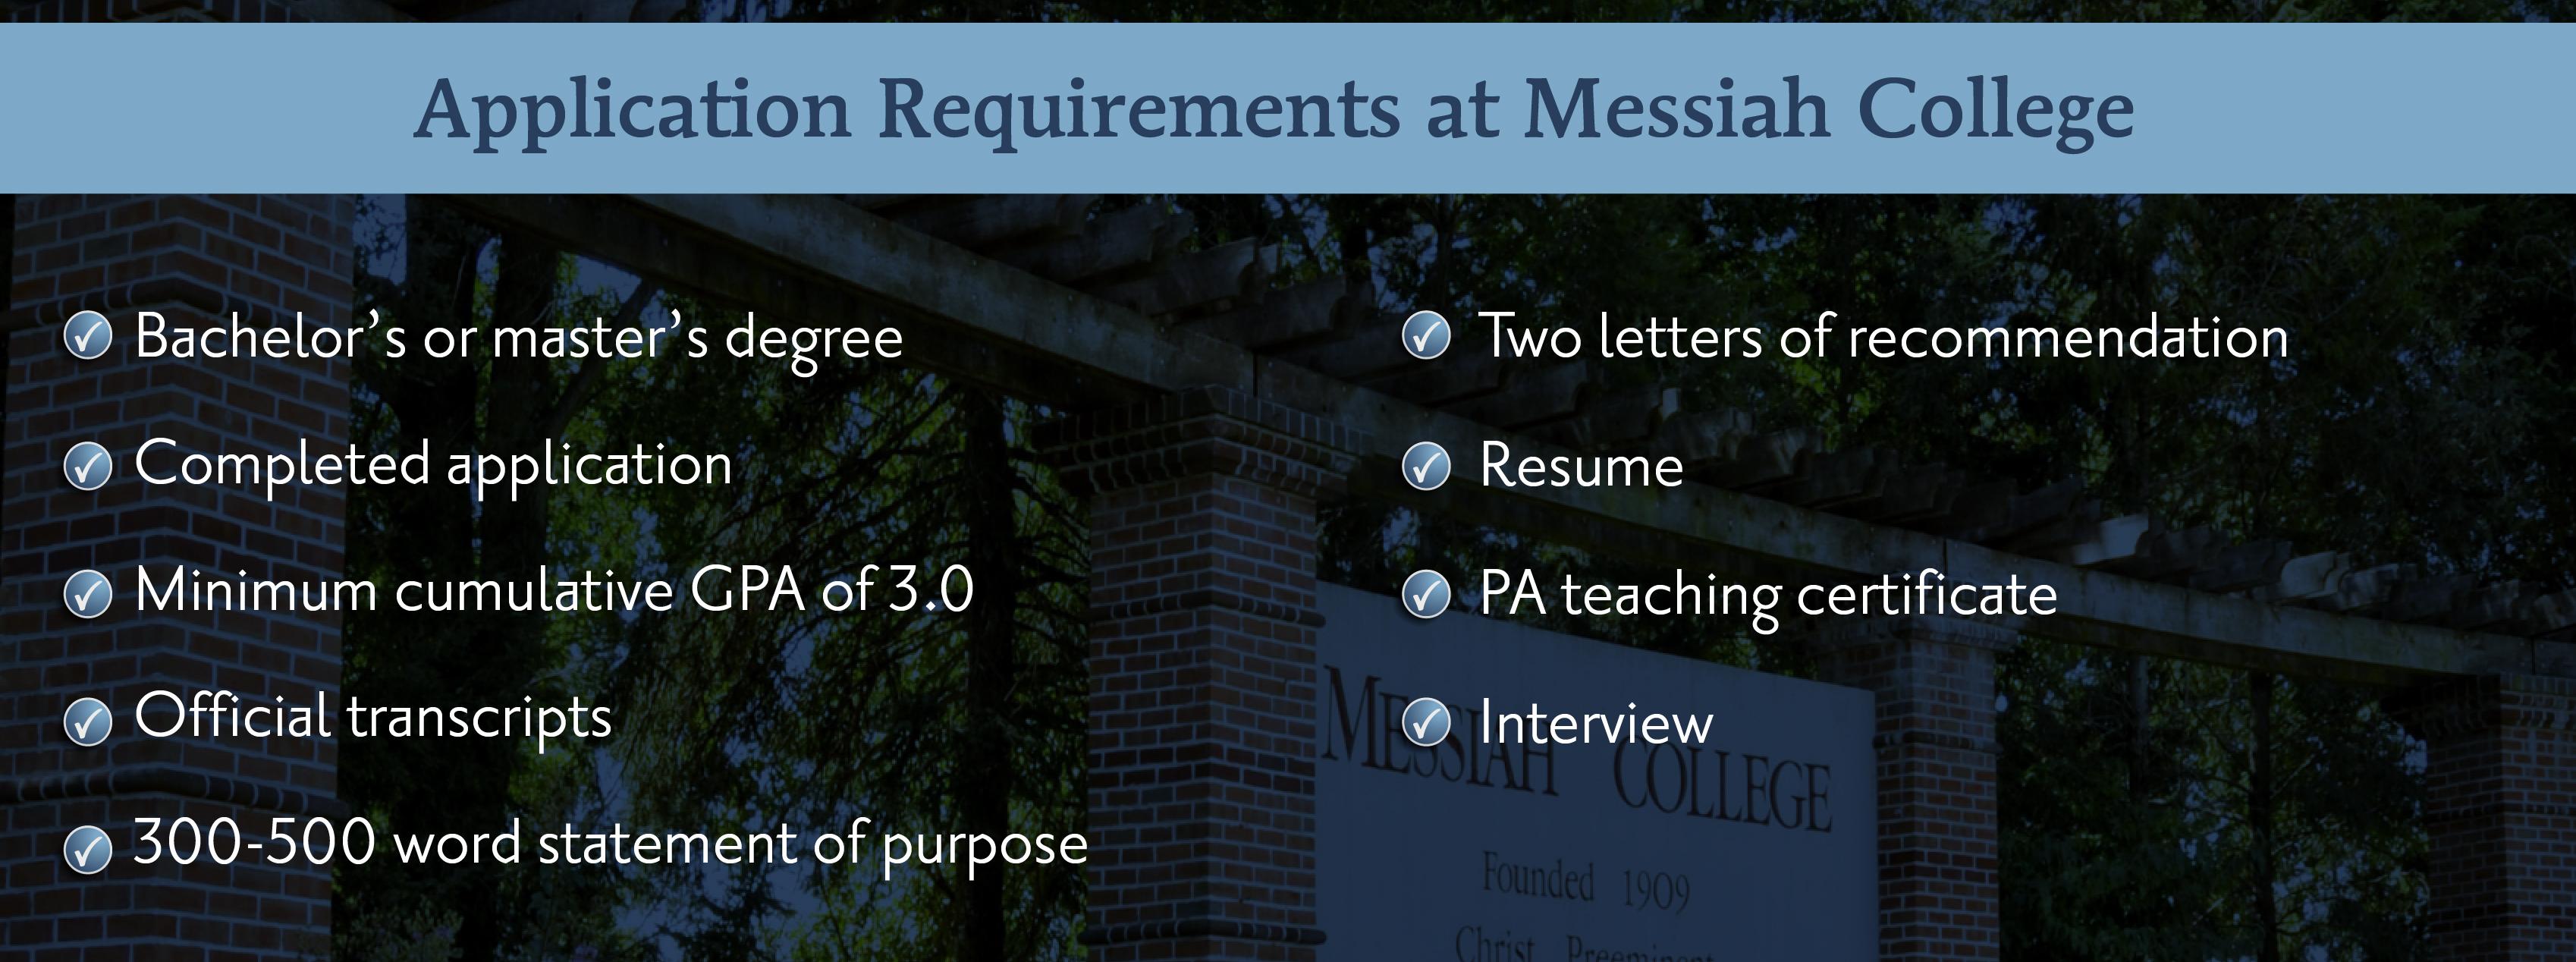 Application requirements at Messiah College